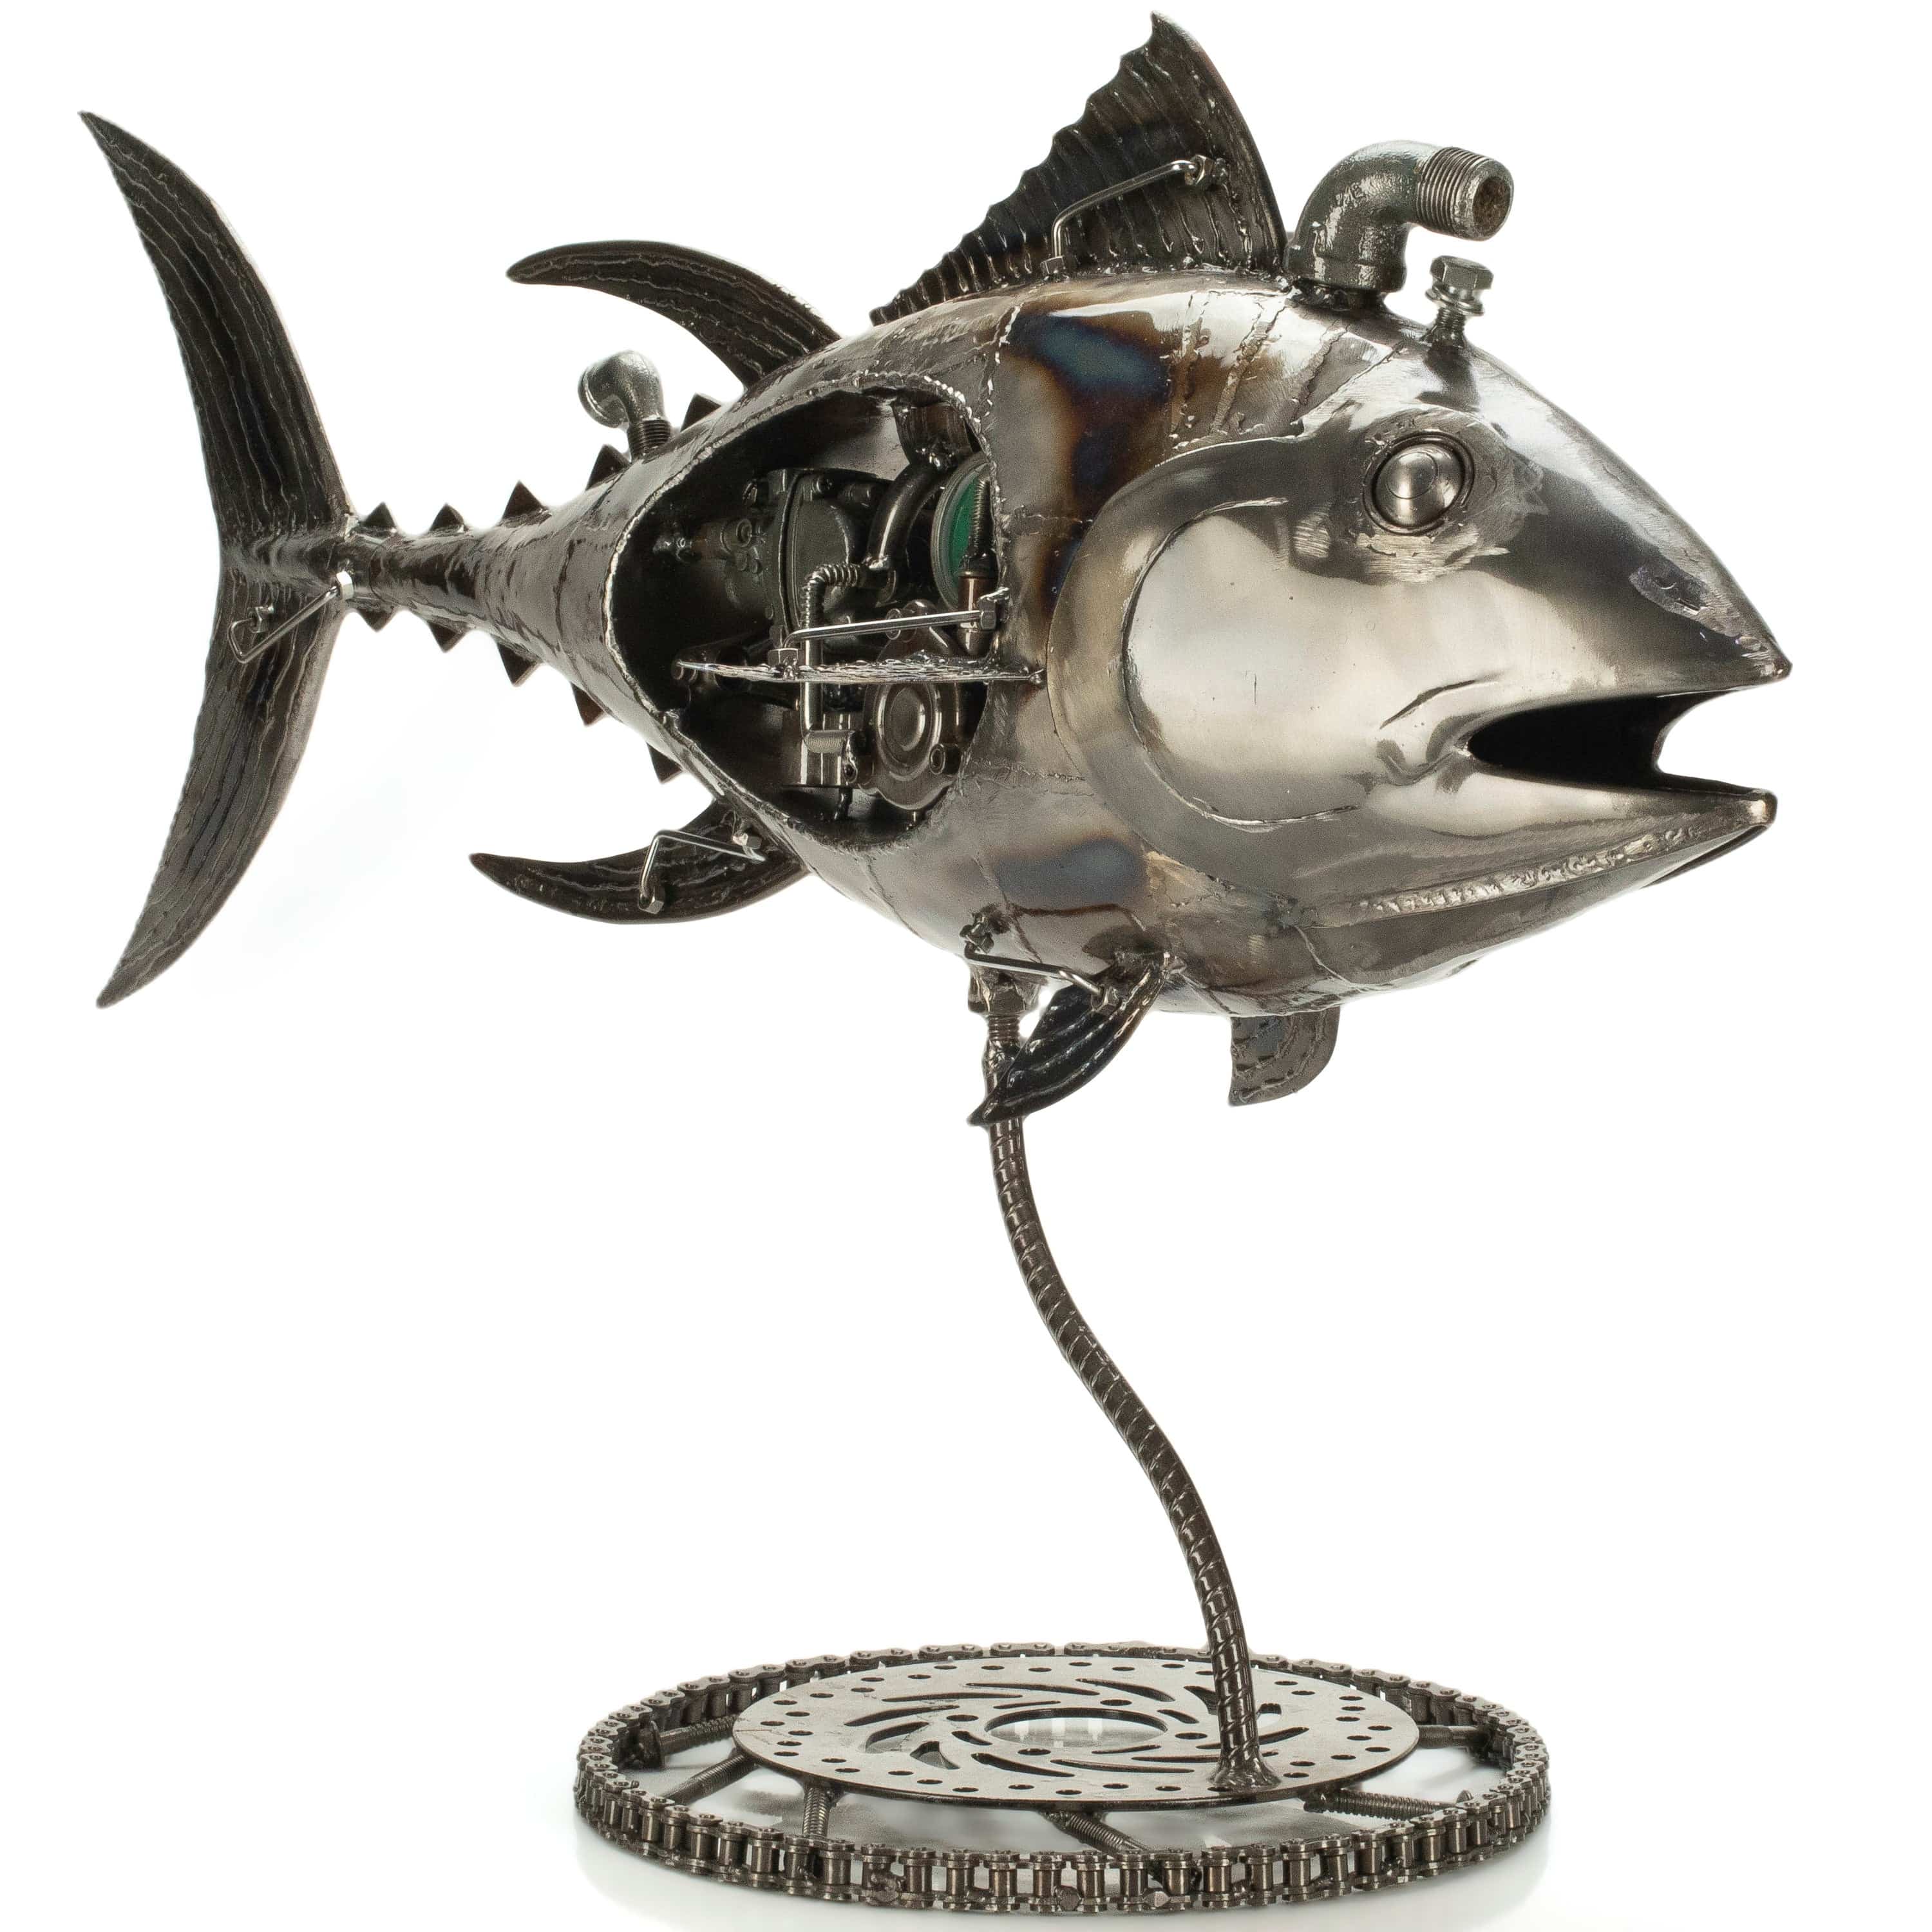 KALIFANO Recycled Metal Art 39" Tuna Fish Inspired Recycled Metal Art Sculpture RMS-T99x55-PK